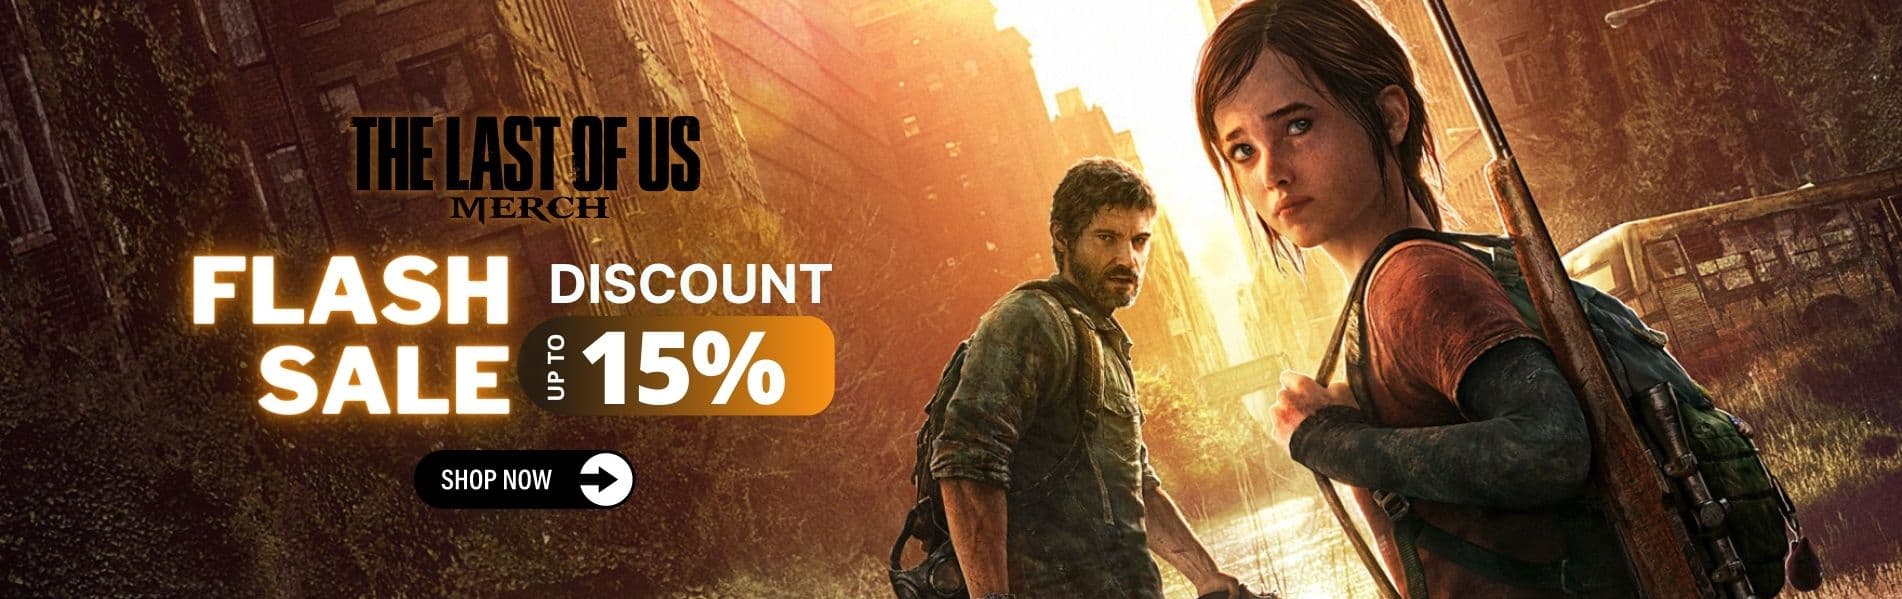 The Last Of Us Merch Banner 1